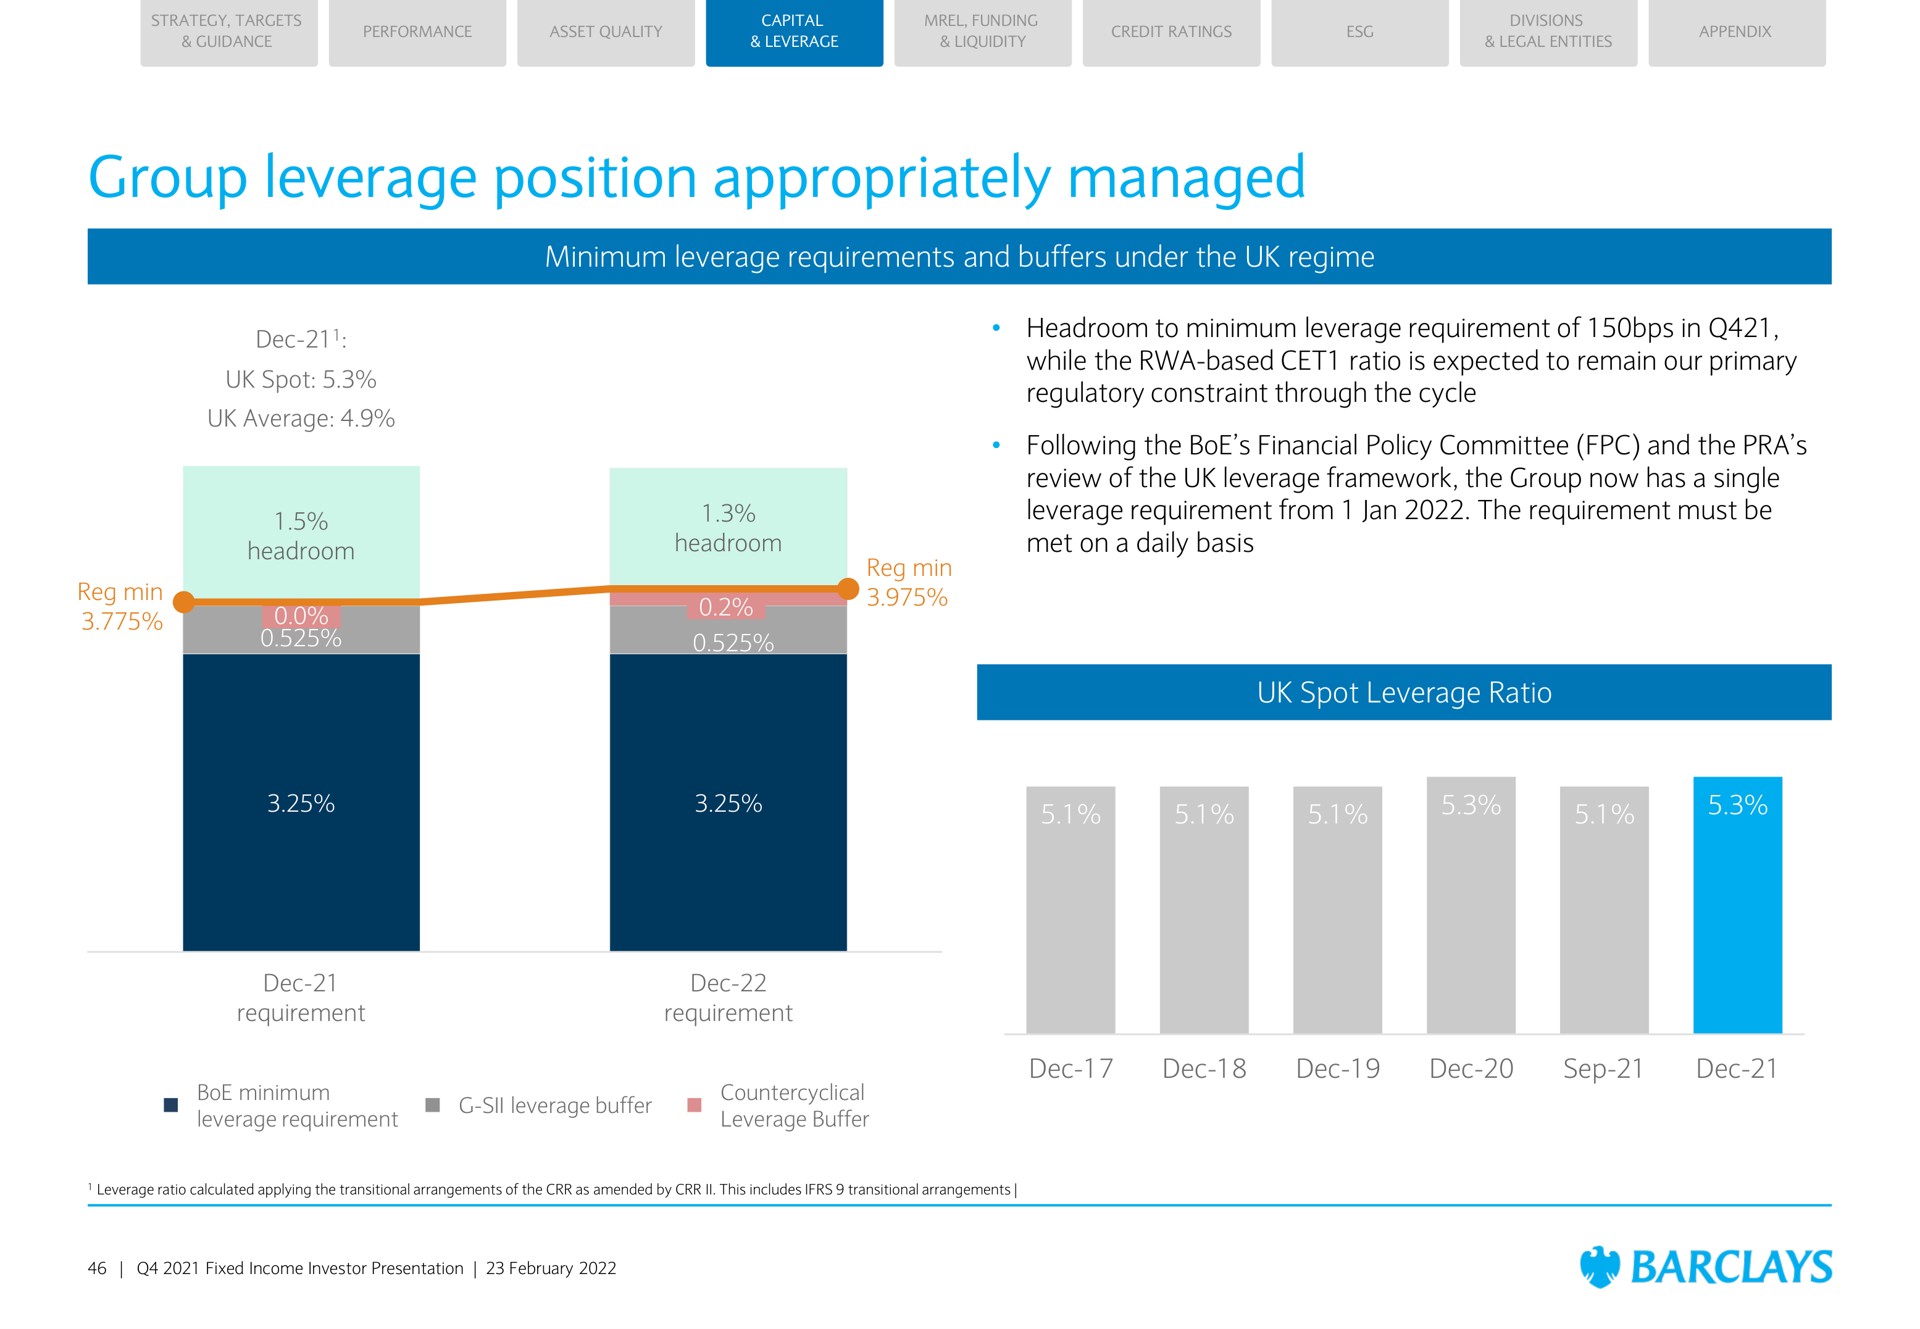 group leverage position appropriately managed minimum leverage requirements and buffers under the regime headroom to minimum leverage requirement of in while the based ratio is expected to remain our primary regulatory constraint through the cycle following the financial policy committee and the review of the leverage framework the group now has a single leverage requirement from the requirement must be met on a daily basis spot leverage ratio | Barclays